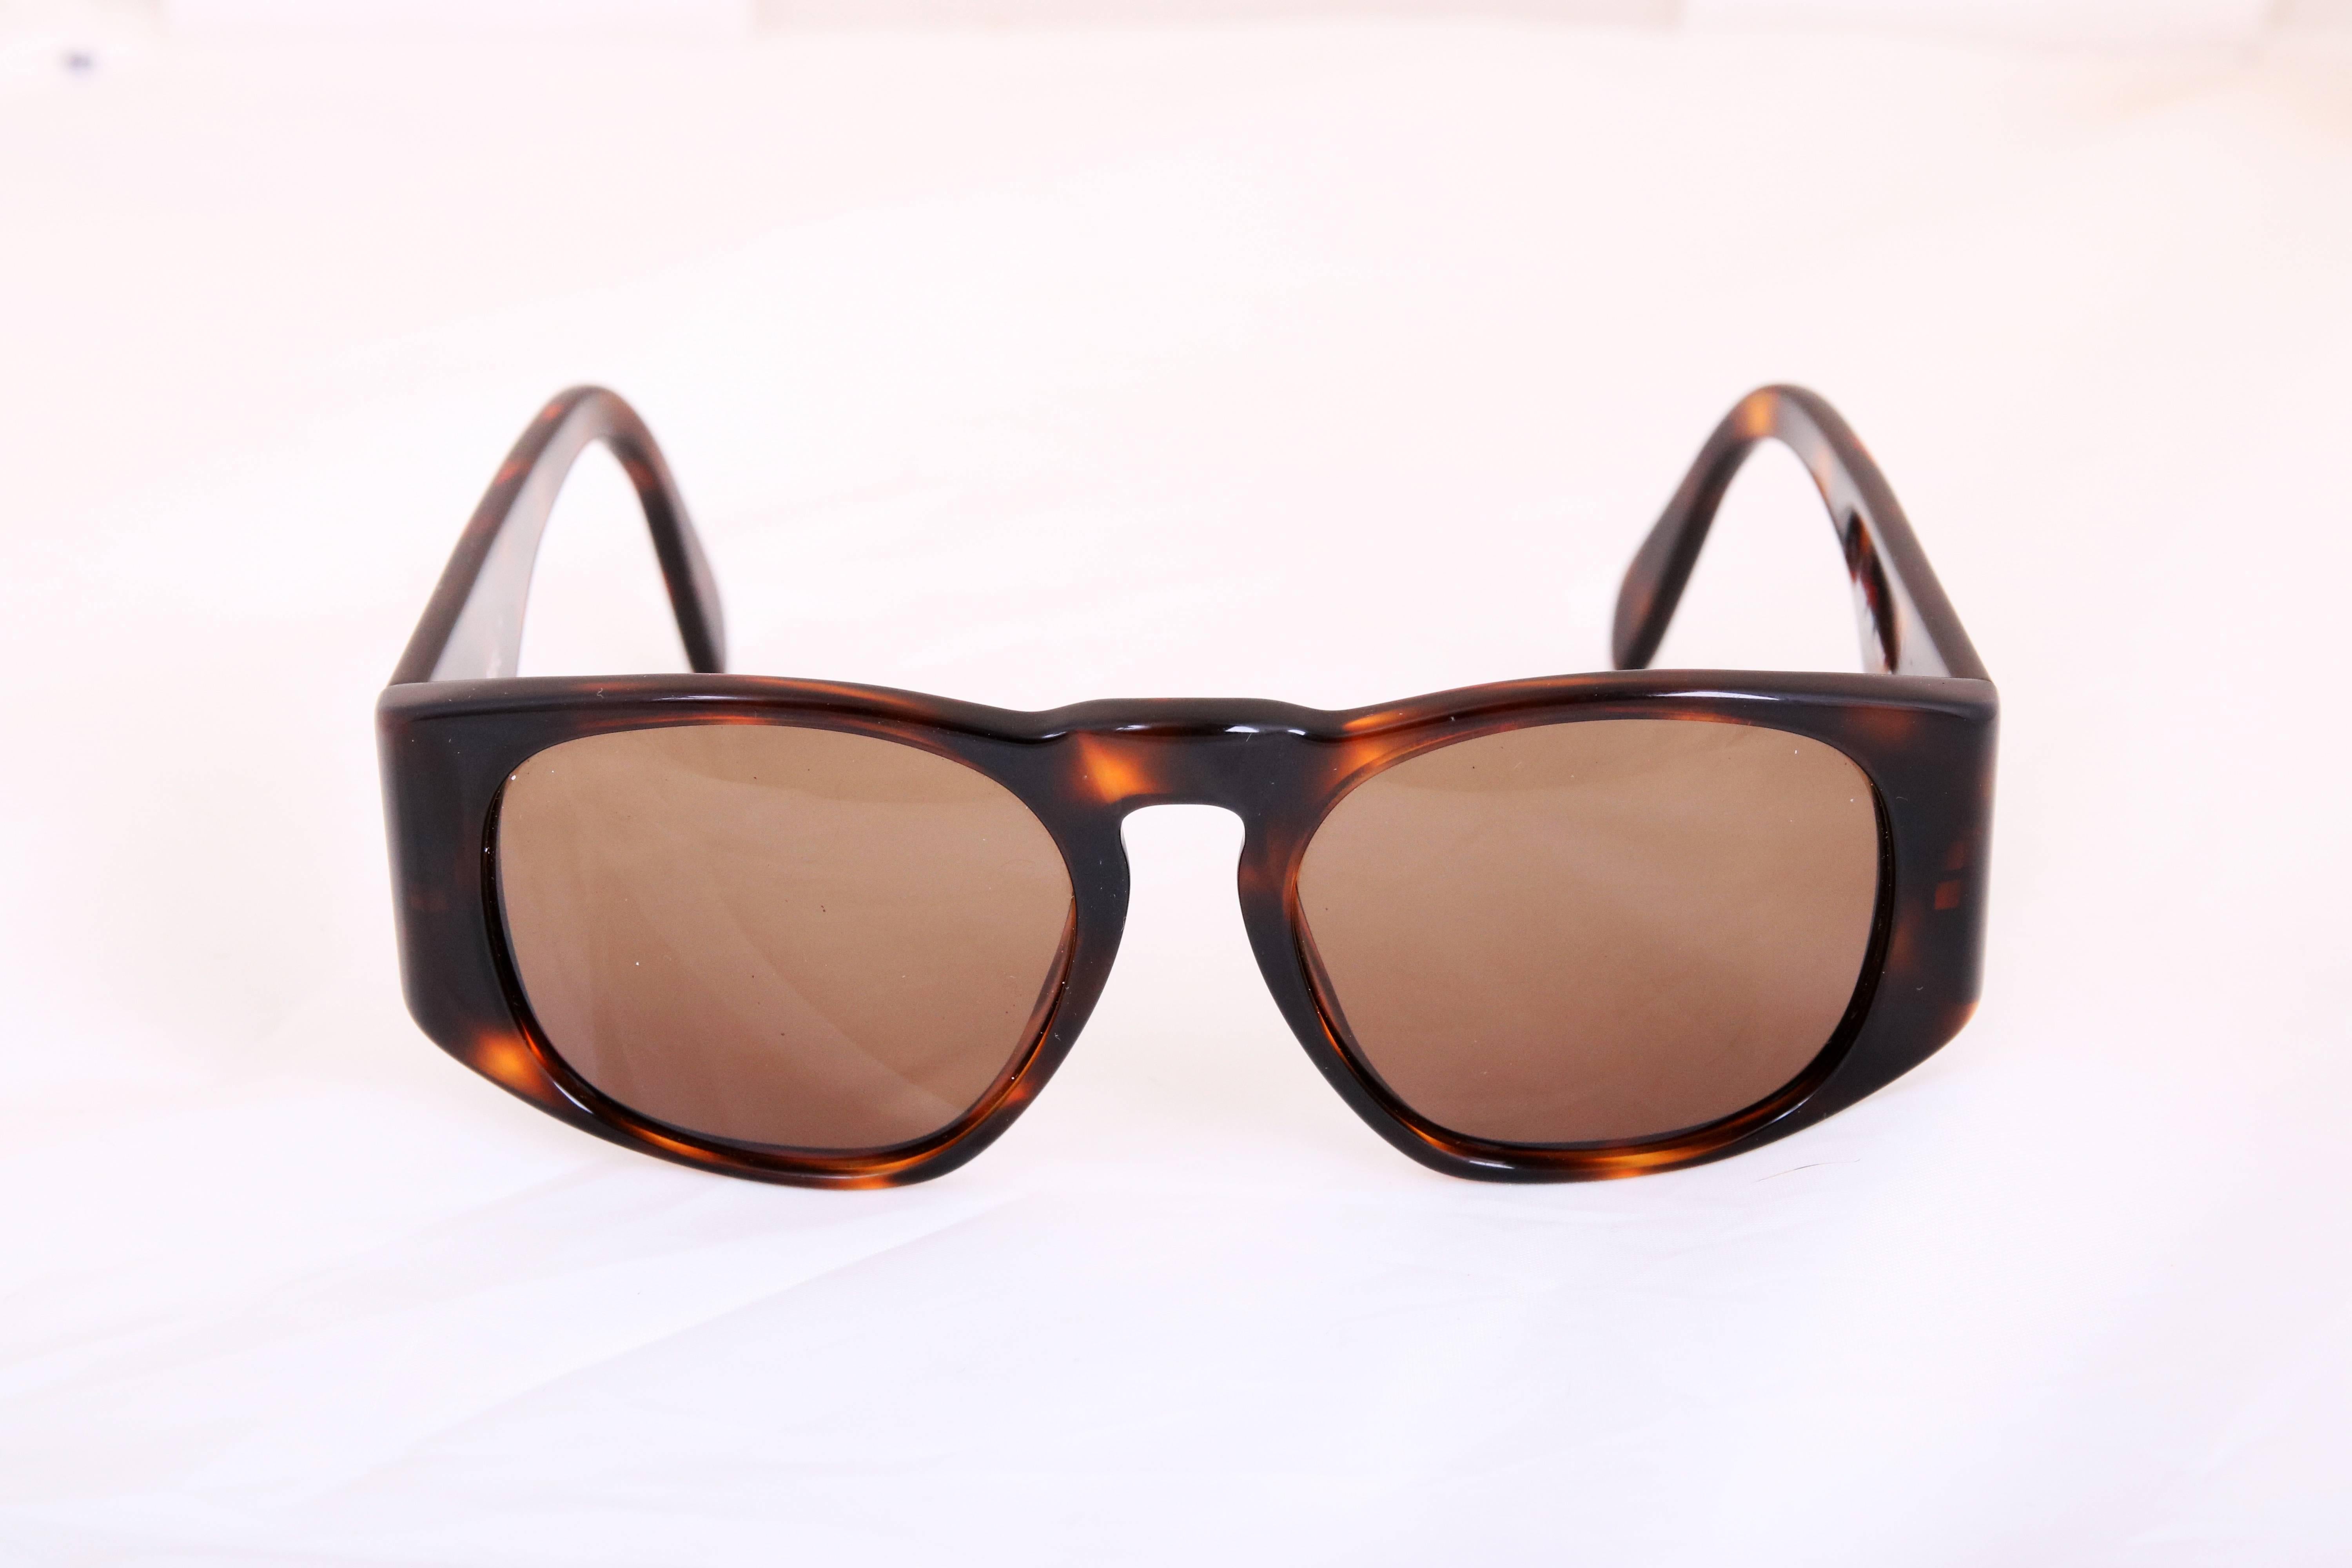 Chanel tortoise shell sunglasses as seen on Lady Gaga. In excellent condition.